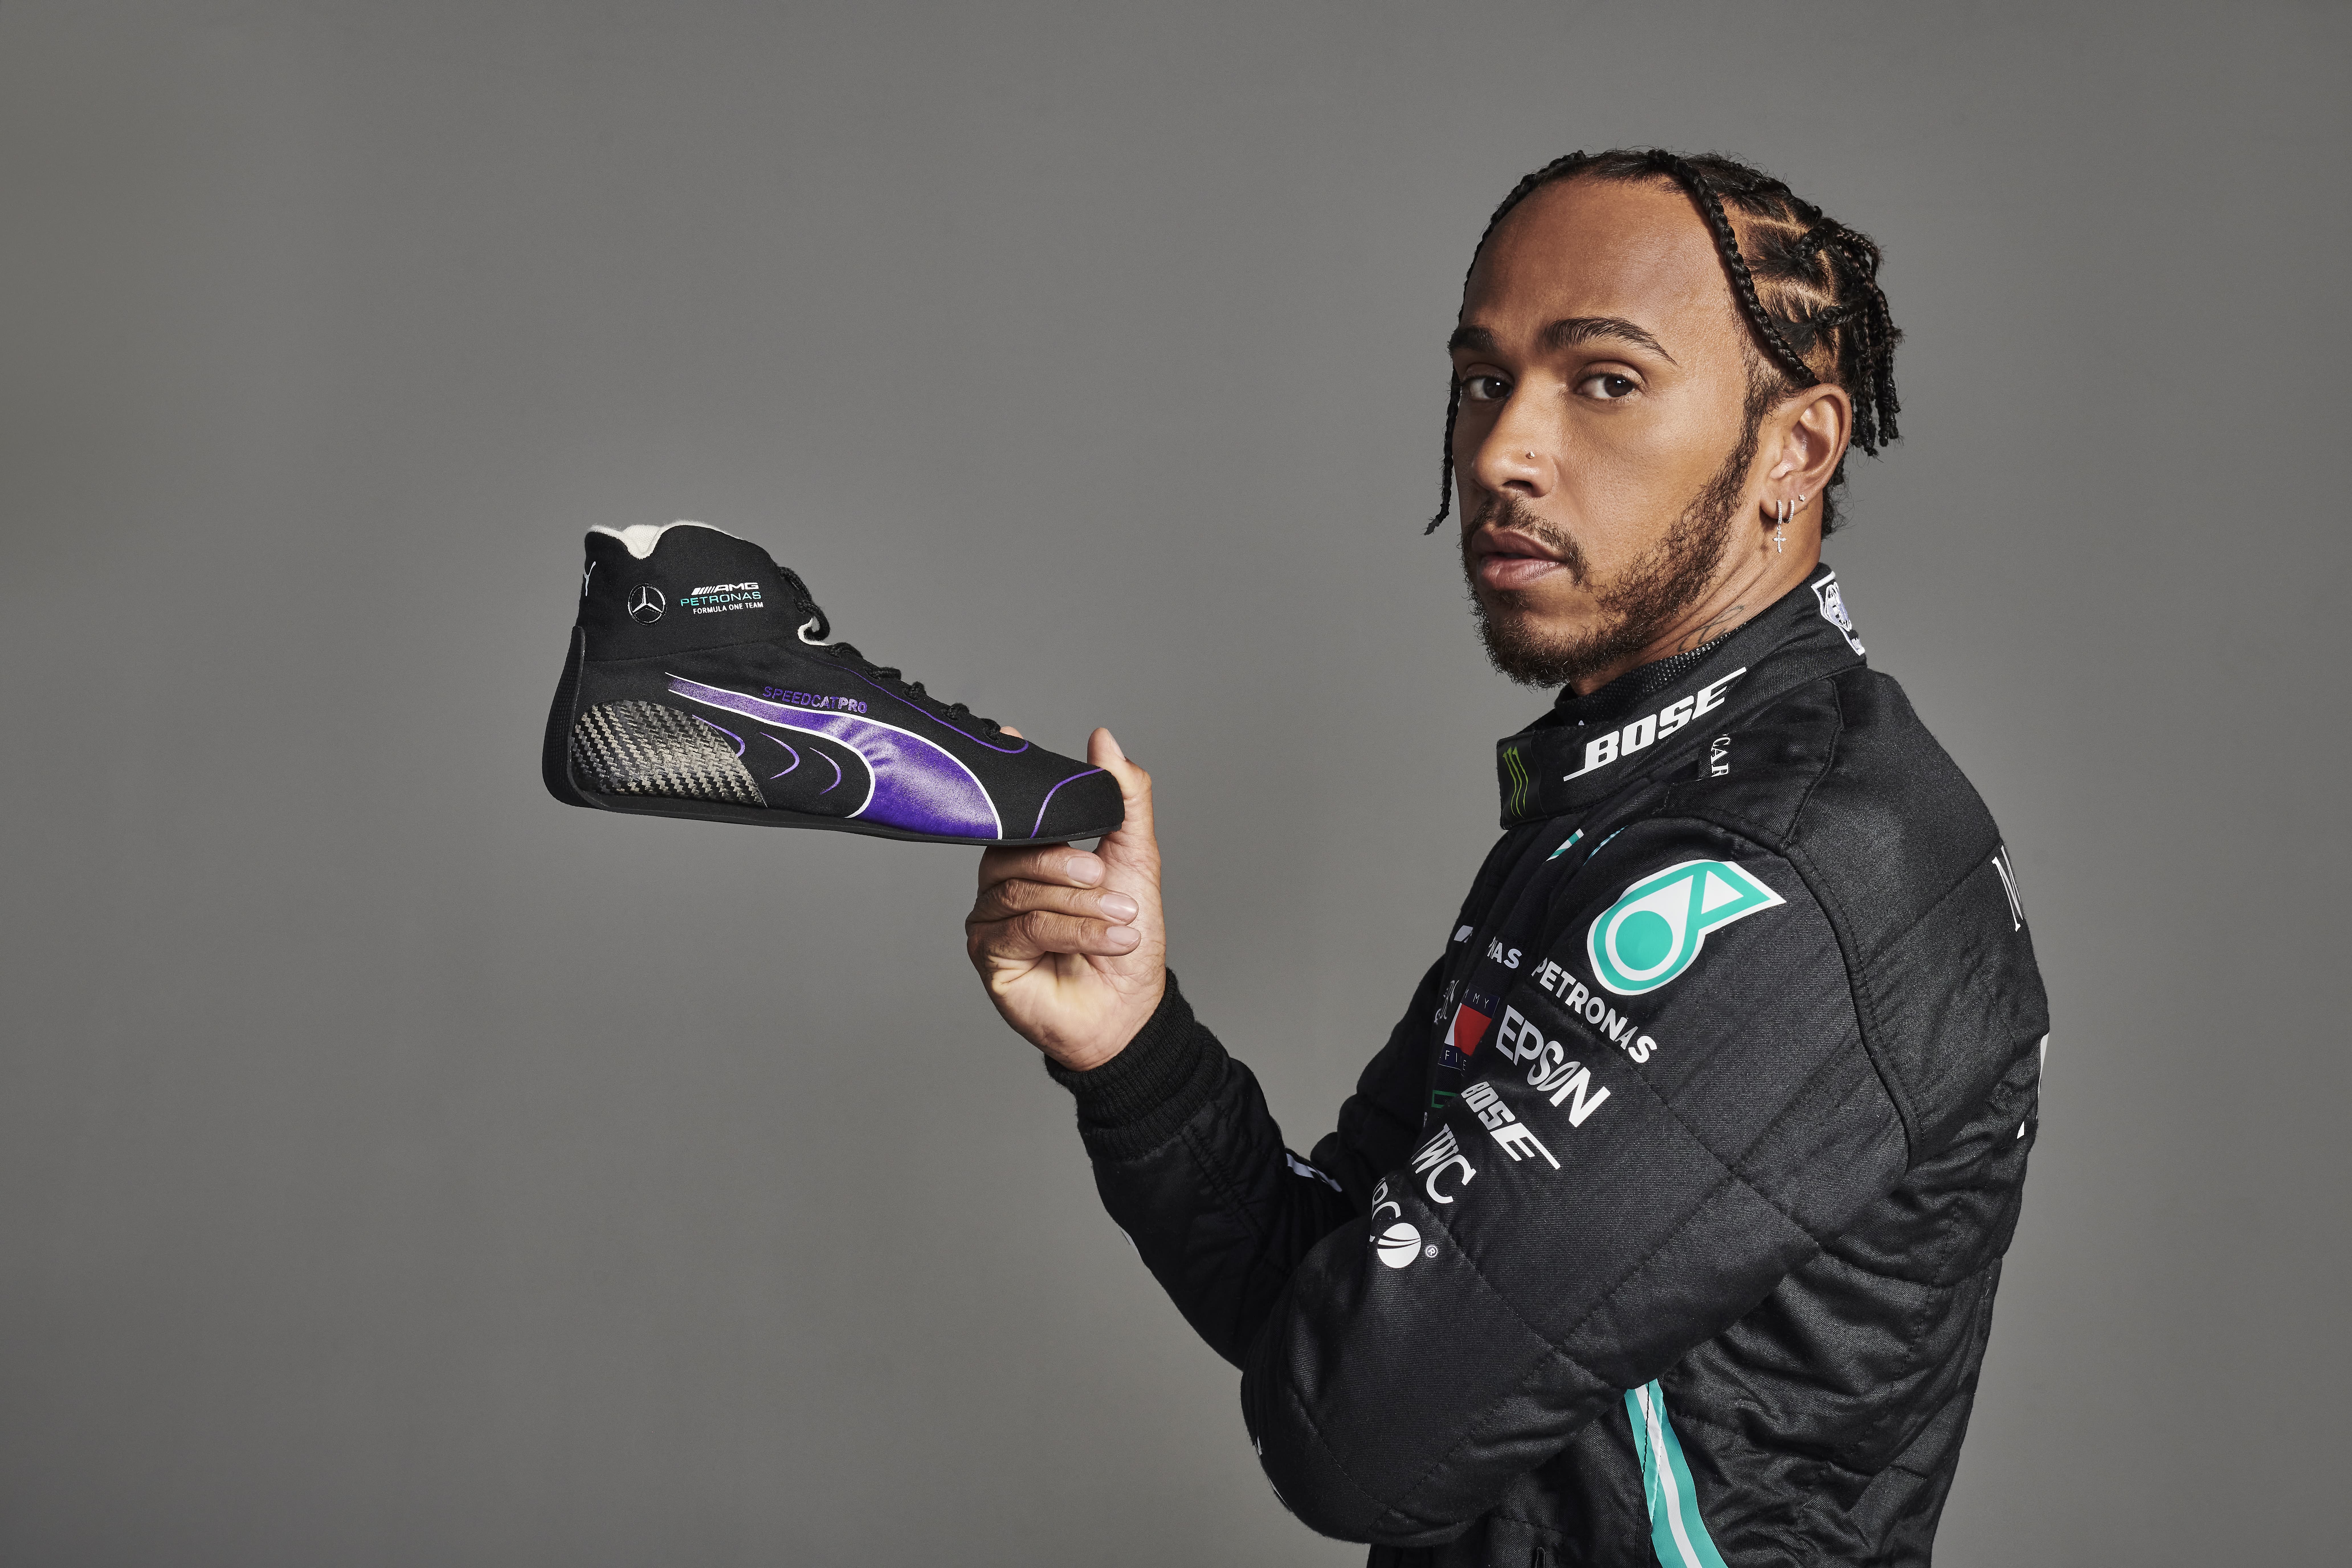 PUMA unleashes the fastest shoes with the very first sales premiere of the Mercedes-AMG Petronas F1 Team Speedcat Pro of Lewis Hamilton